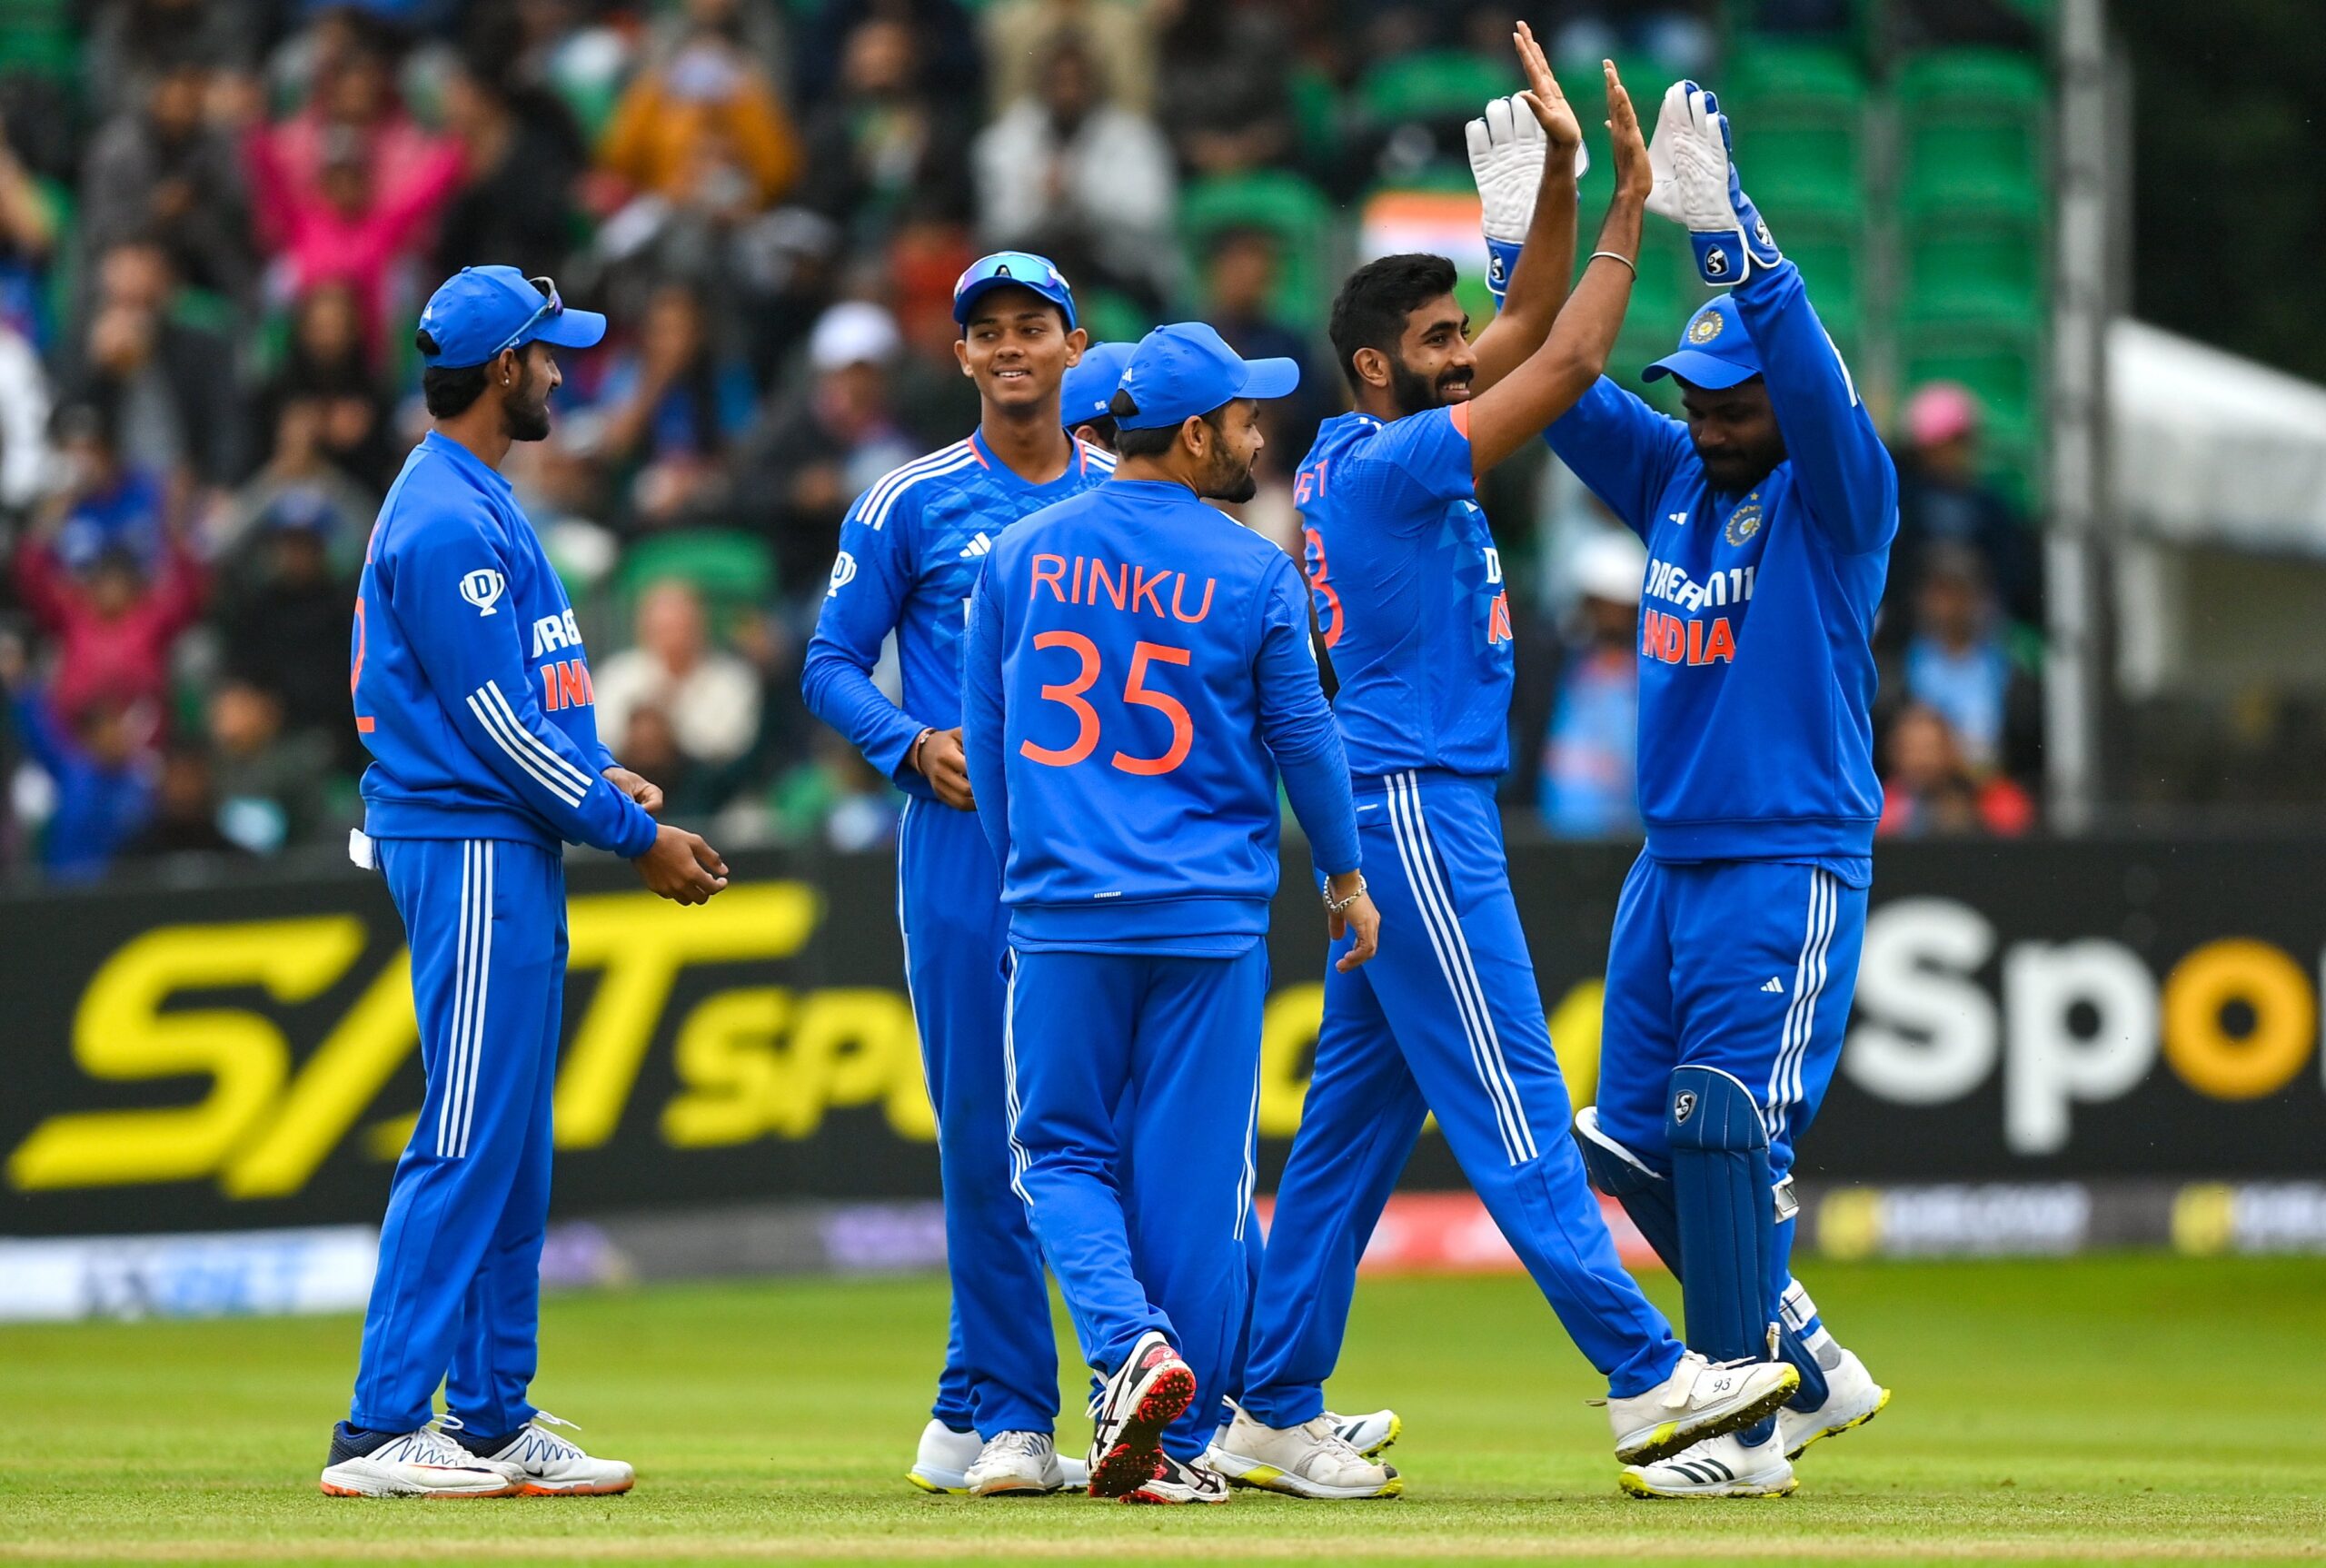 Indian Cricket Team | IRE vs IND | Image: Getty Images